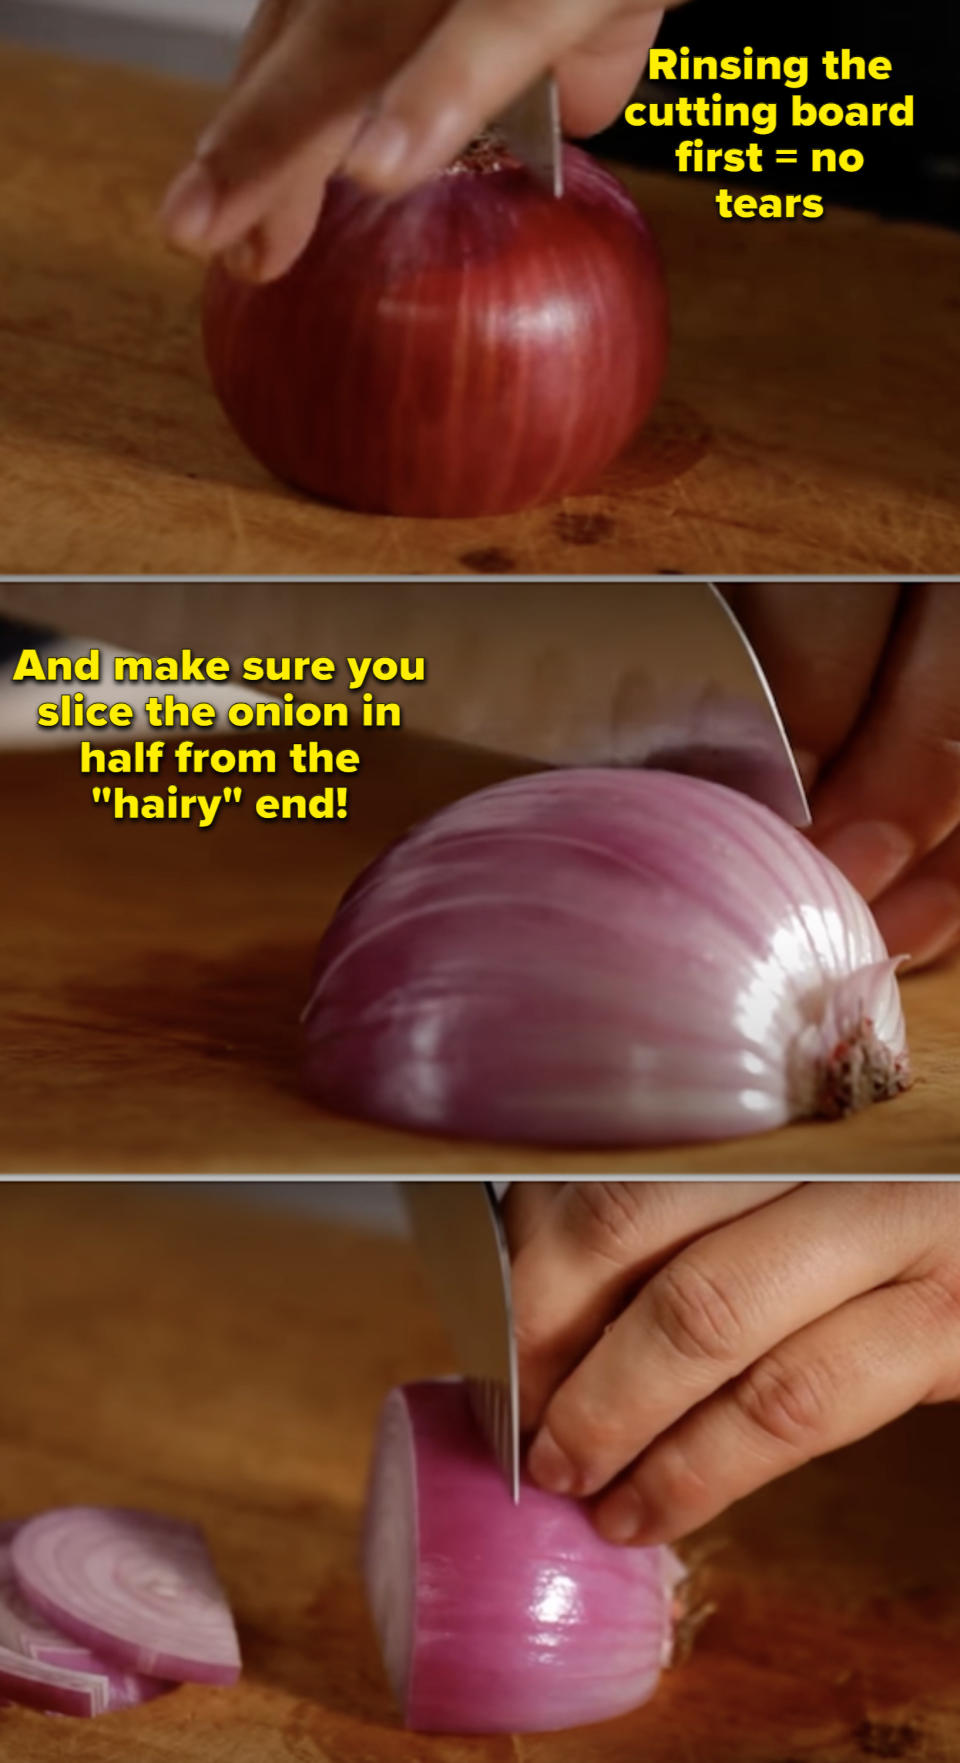 Someone cutting an onion with recommendation to rinse the cutting board first and cut in half from the "hairy" end